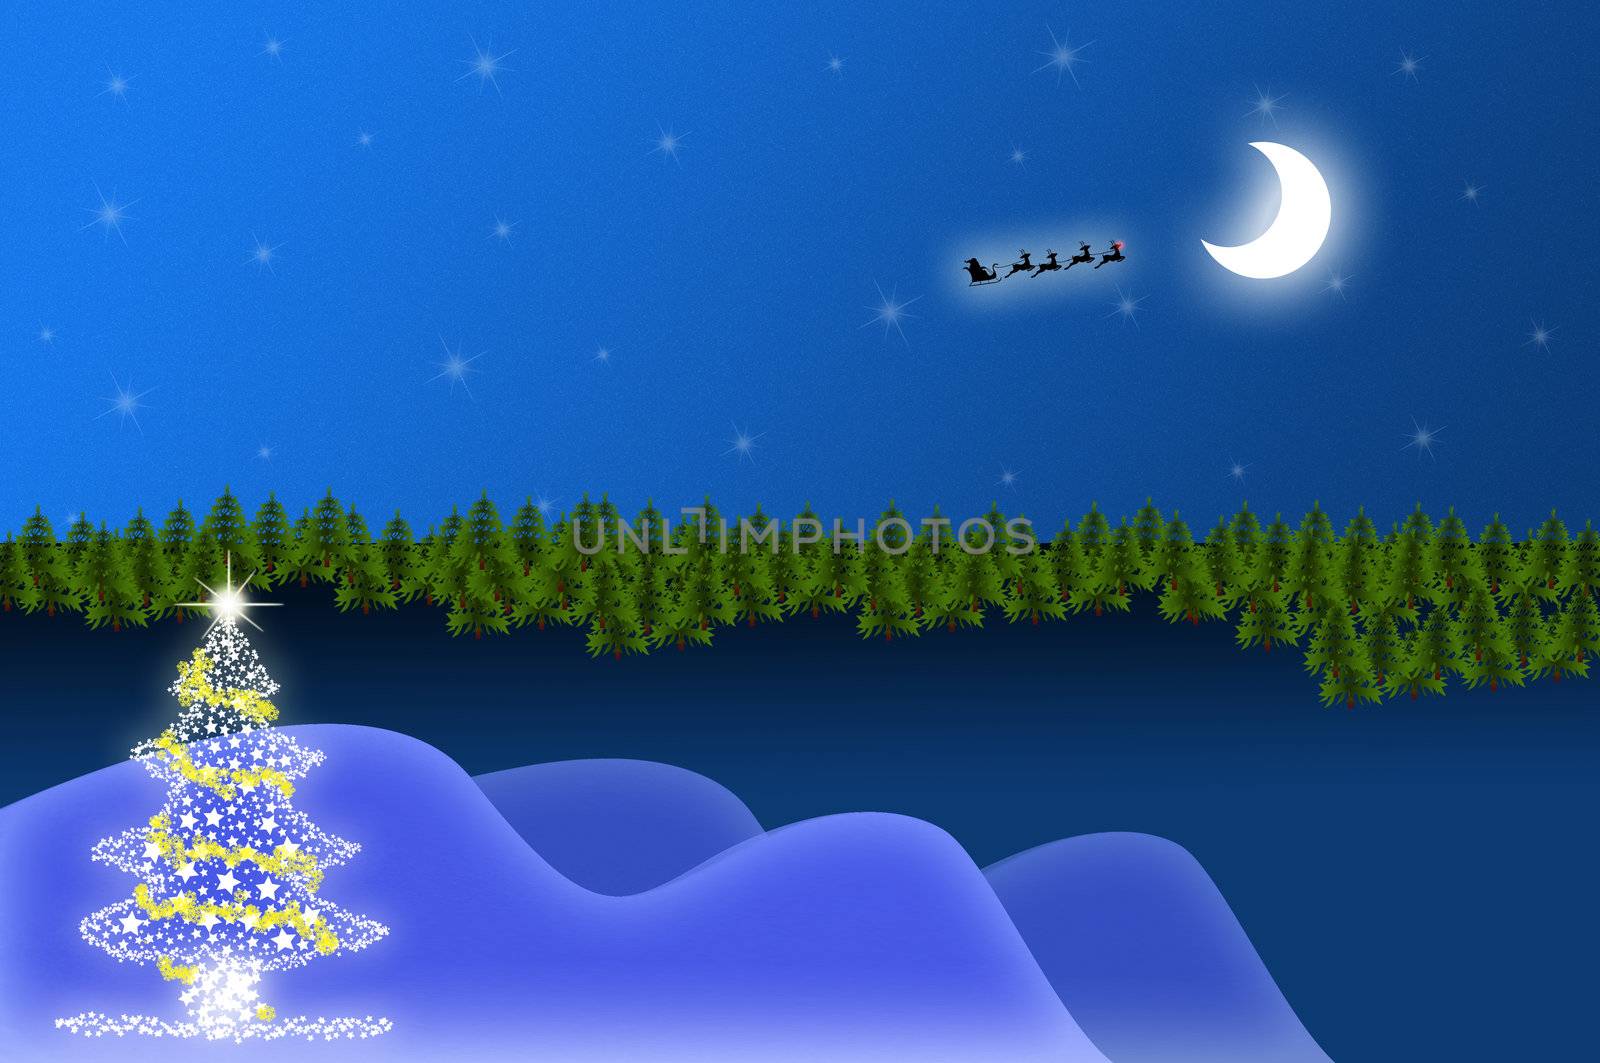 Christmas tree on a landscape with trees, stars, moon and Santa with its sleigh